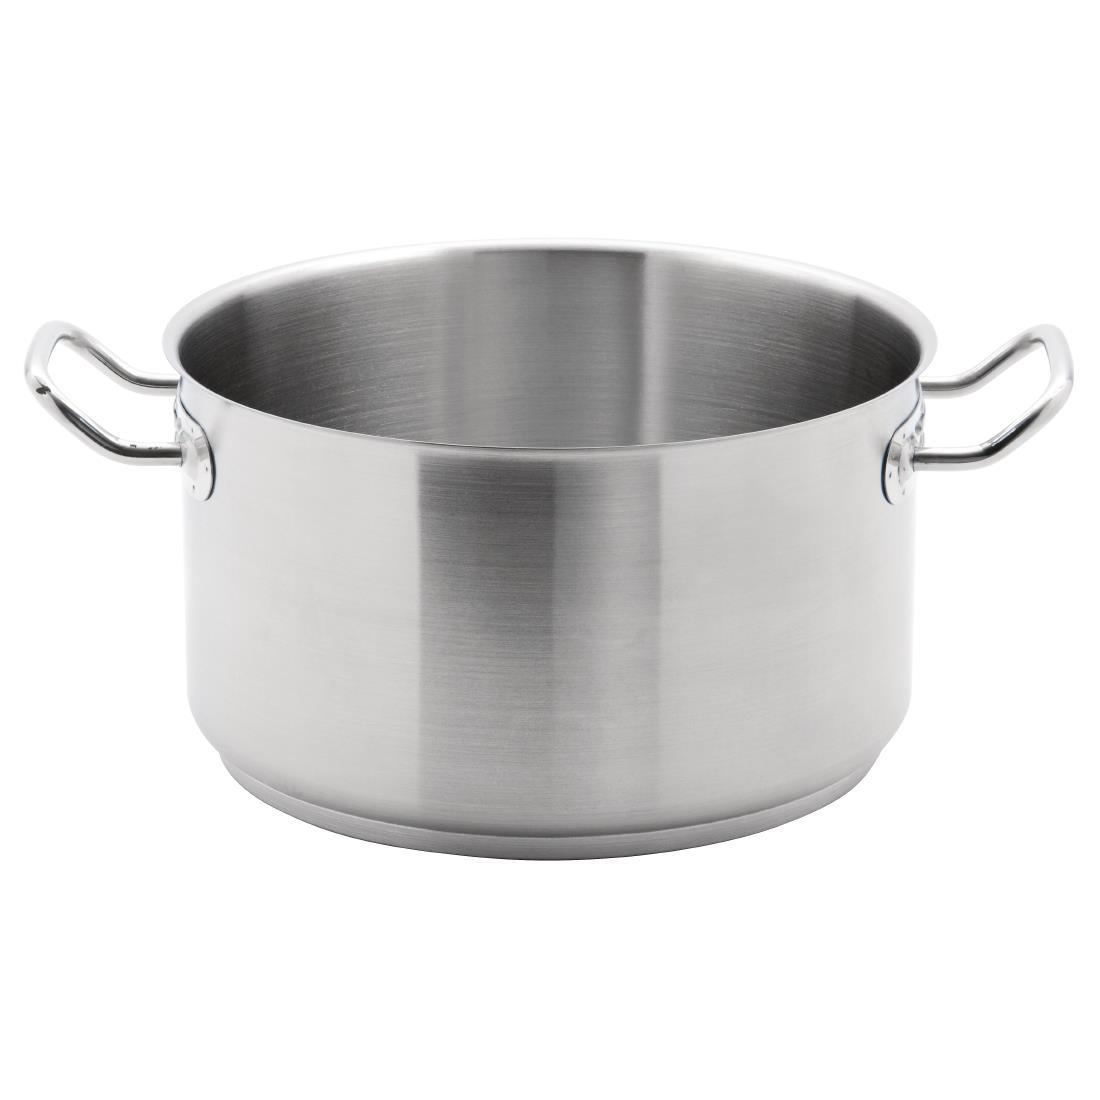 Vogue Stainless Steel Stew Pan 9.5Ltr - M941  - 1